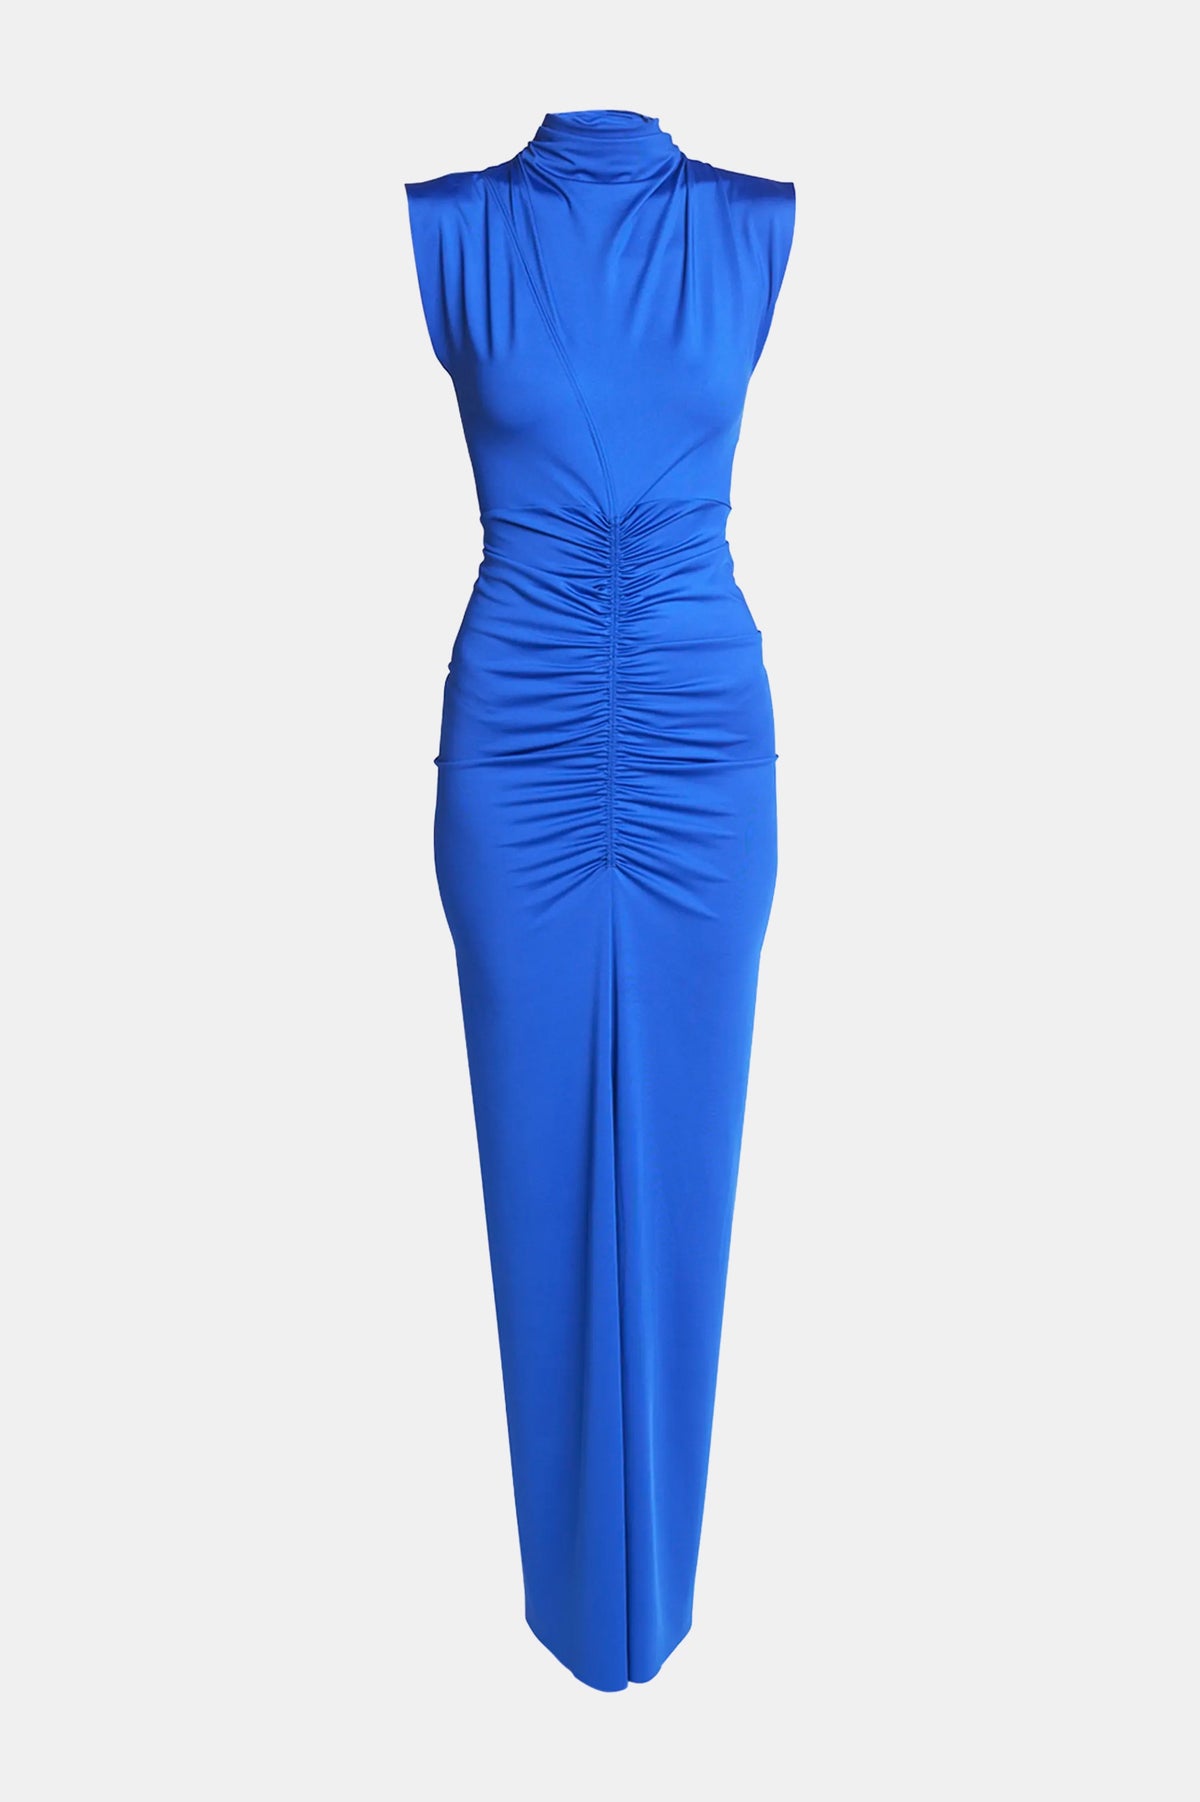 Ruched Jersey Gown in Royal Blue